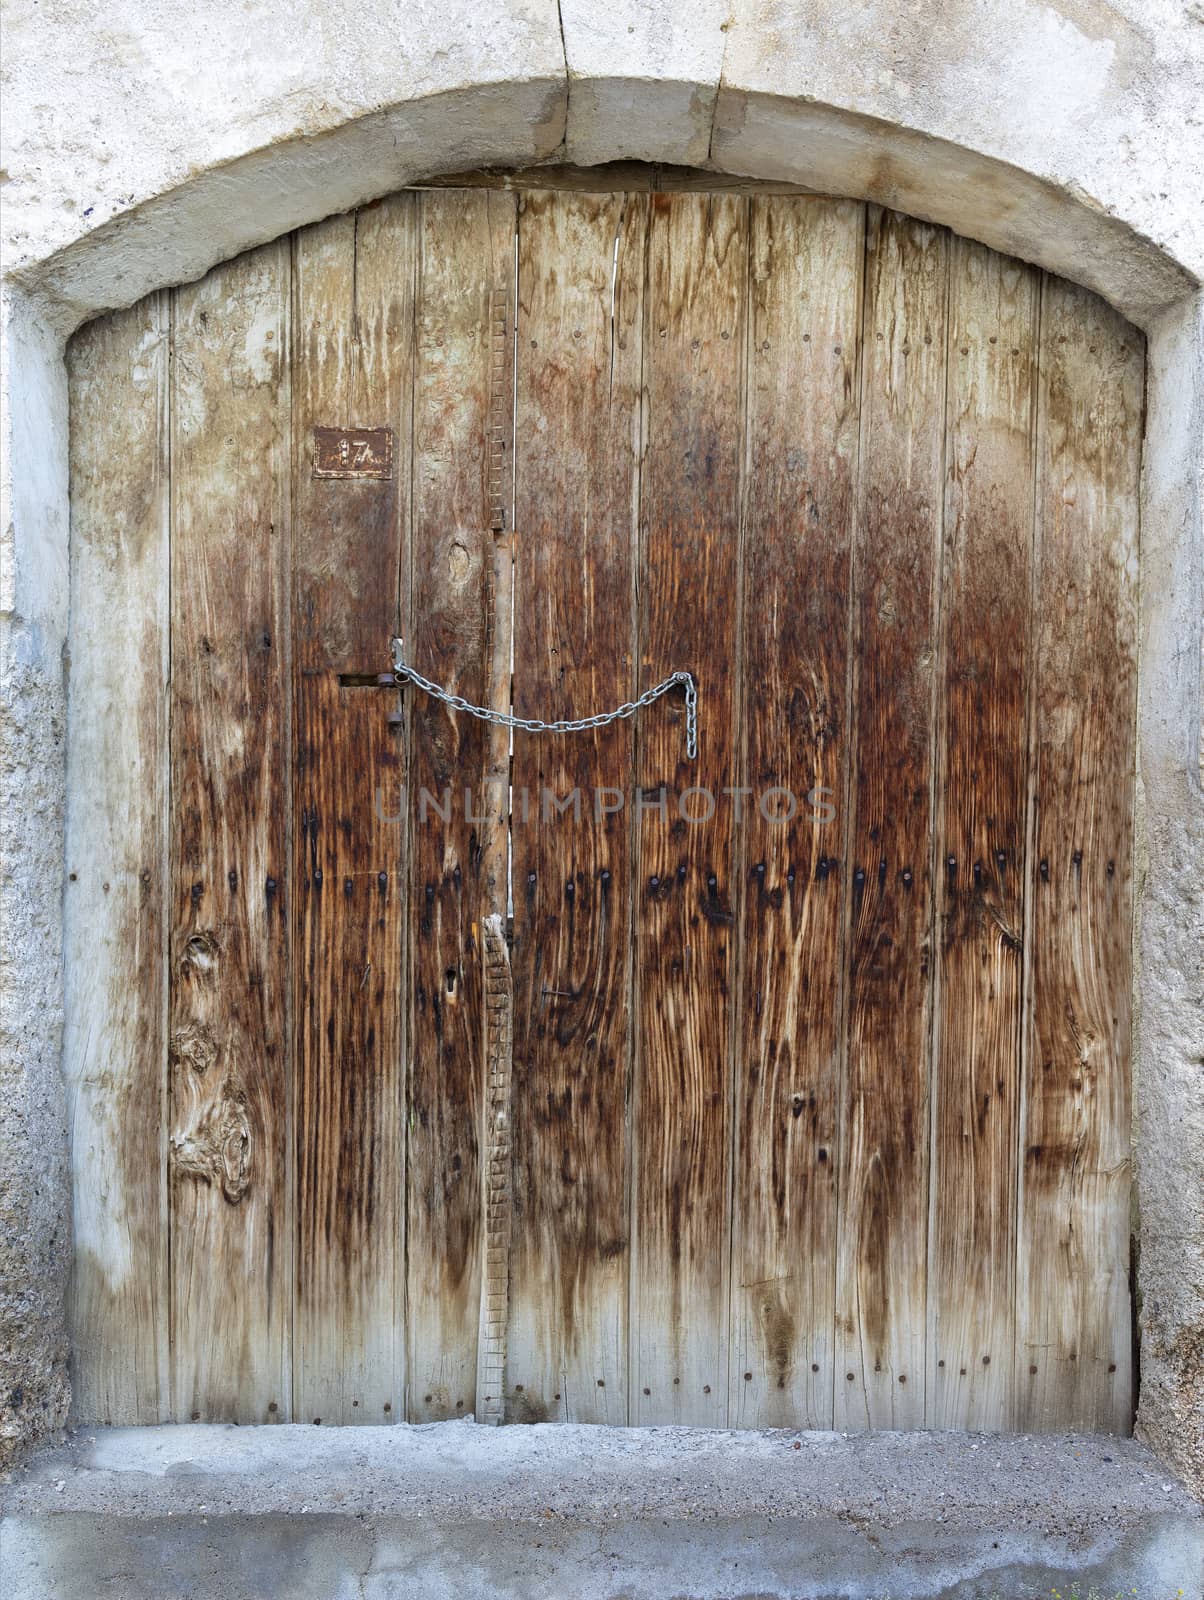 Ancient trapezoidal antique wooden doors with a metal lock in the middle by Sergii